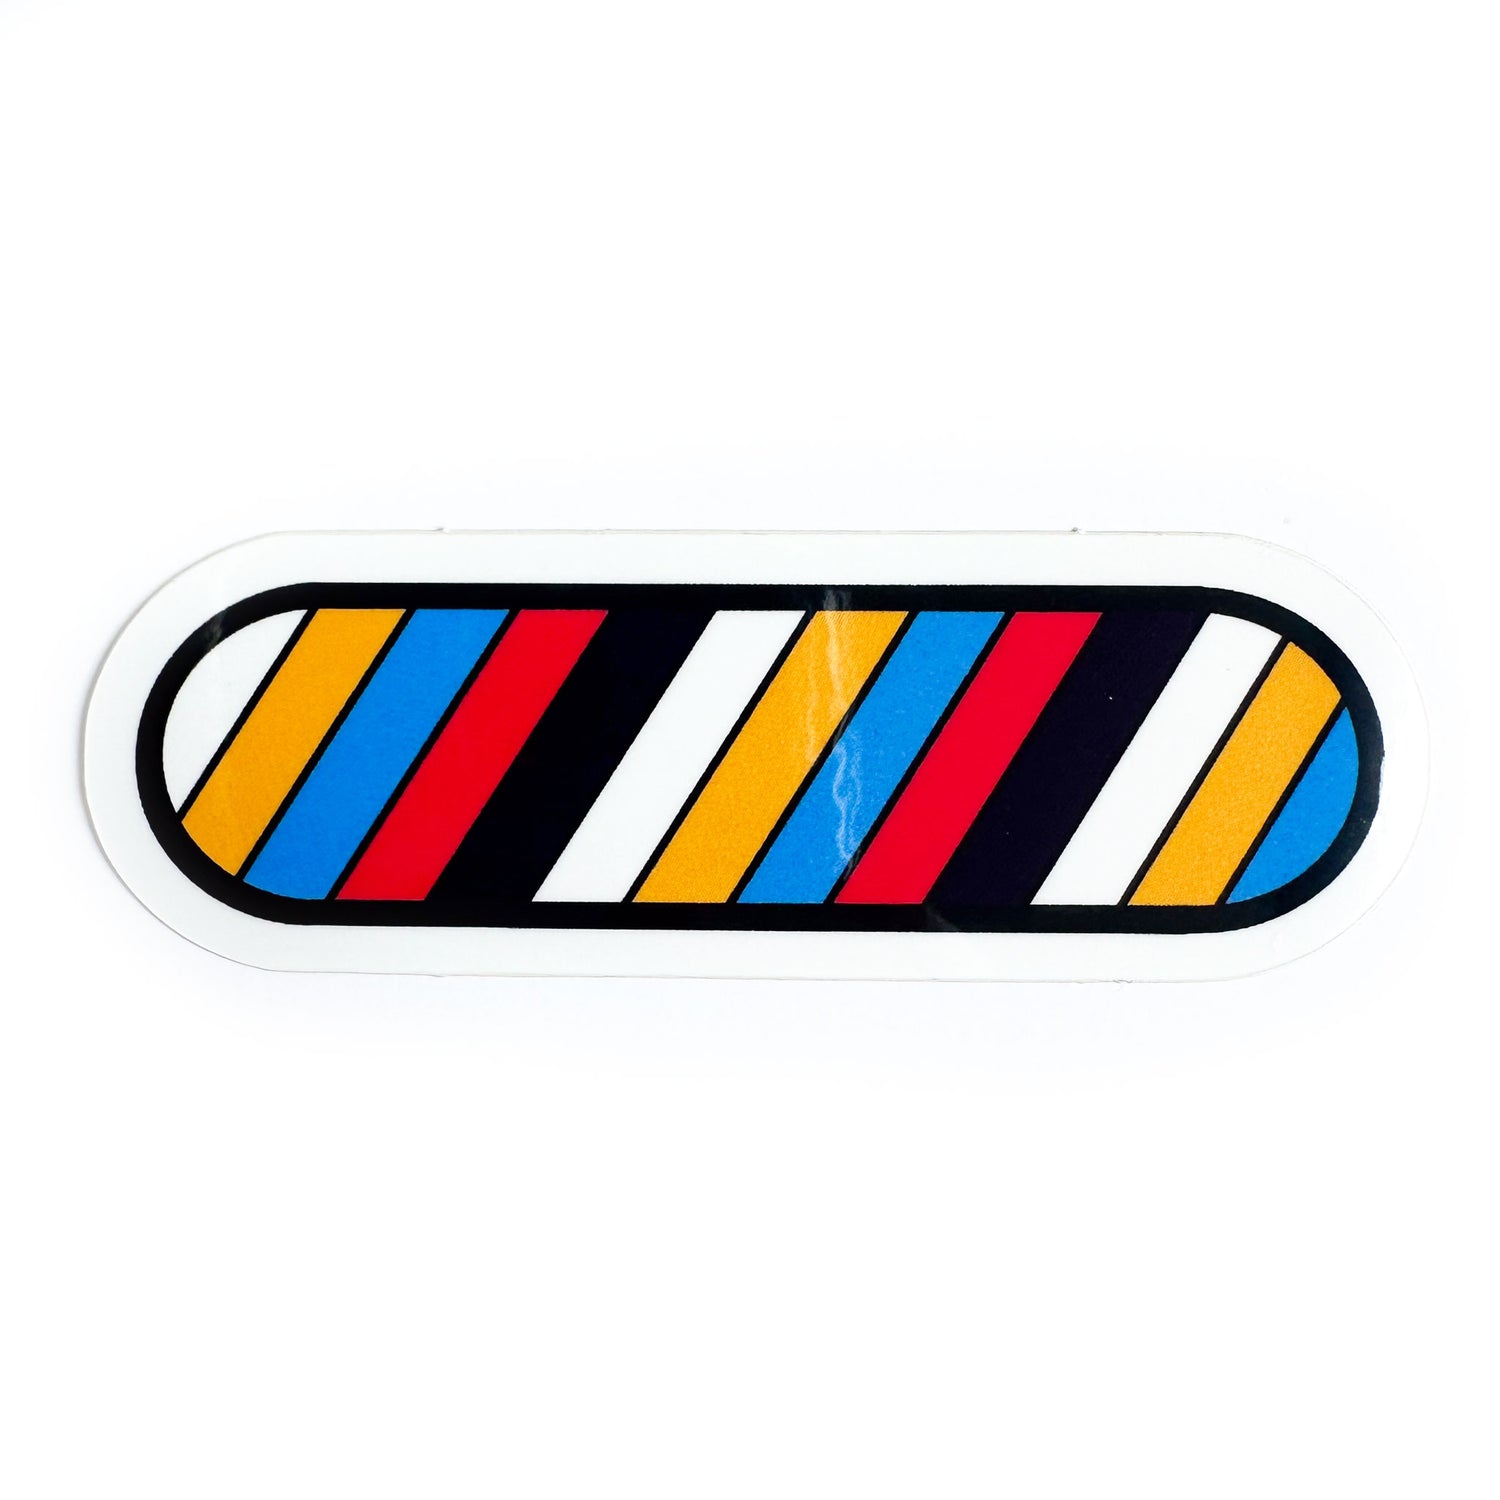 A vinyl sticker in the shape of an oval with the colors of the new Polyamory Pride flag in diagonal stripes across it. 